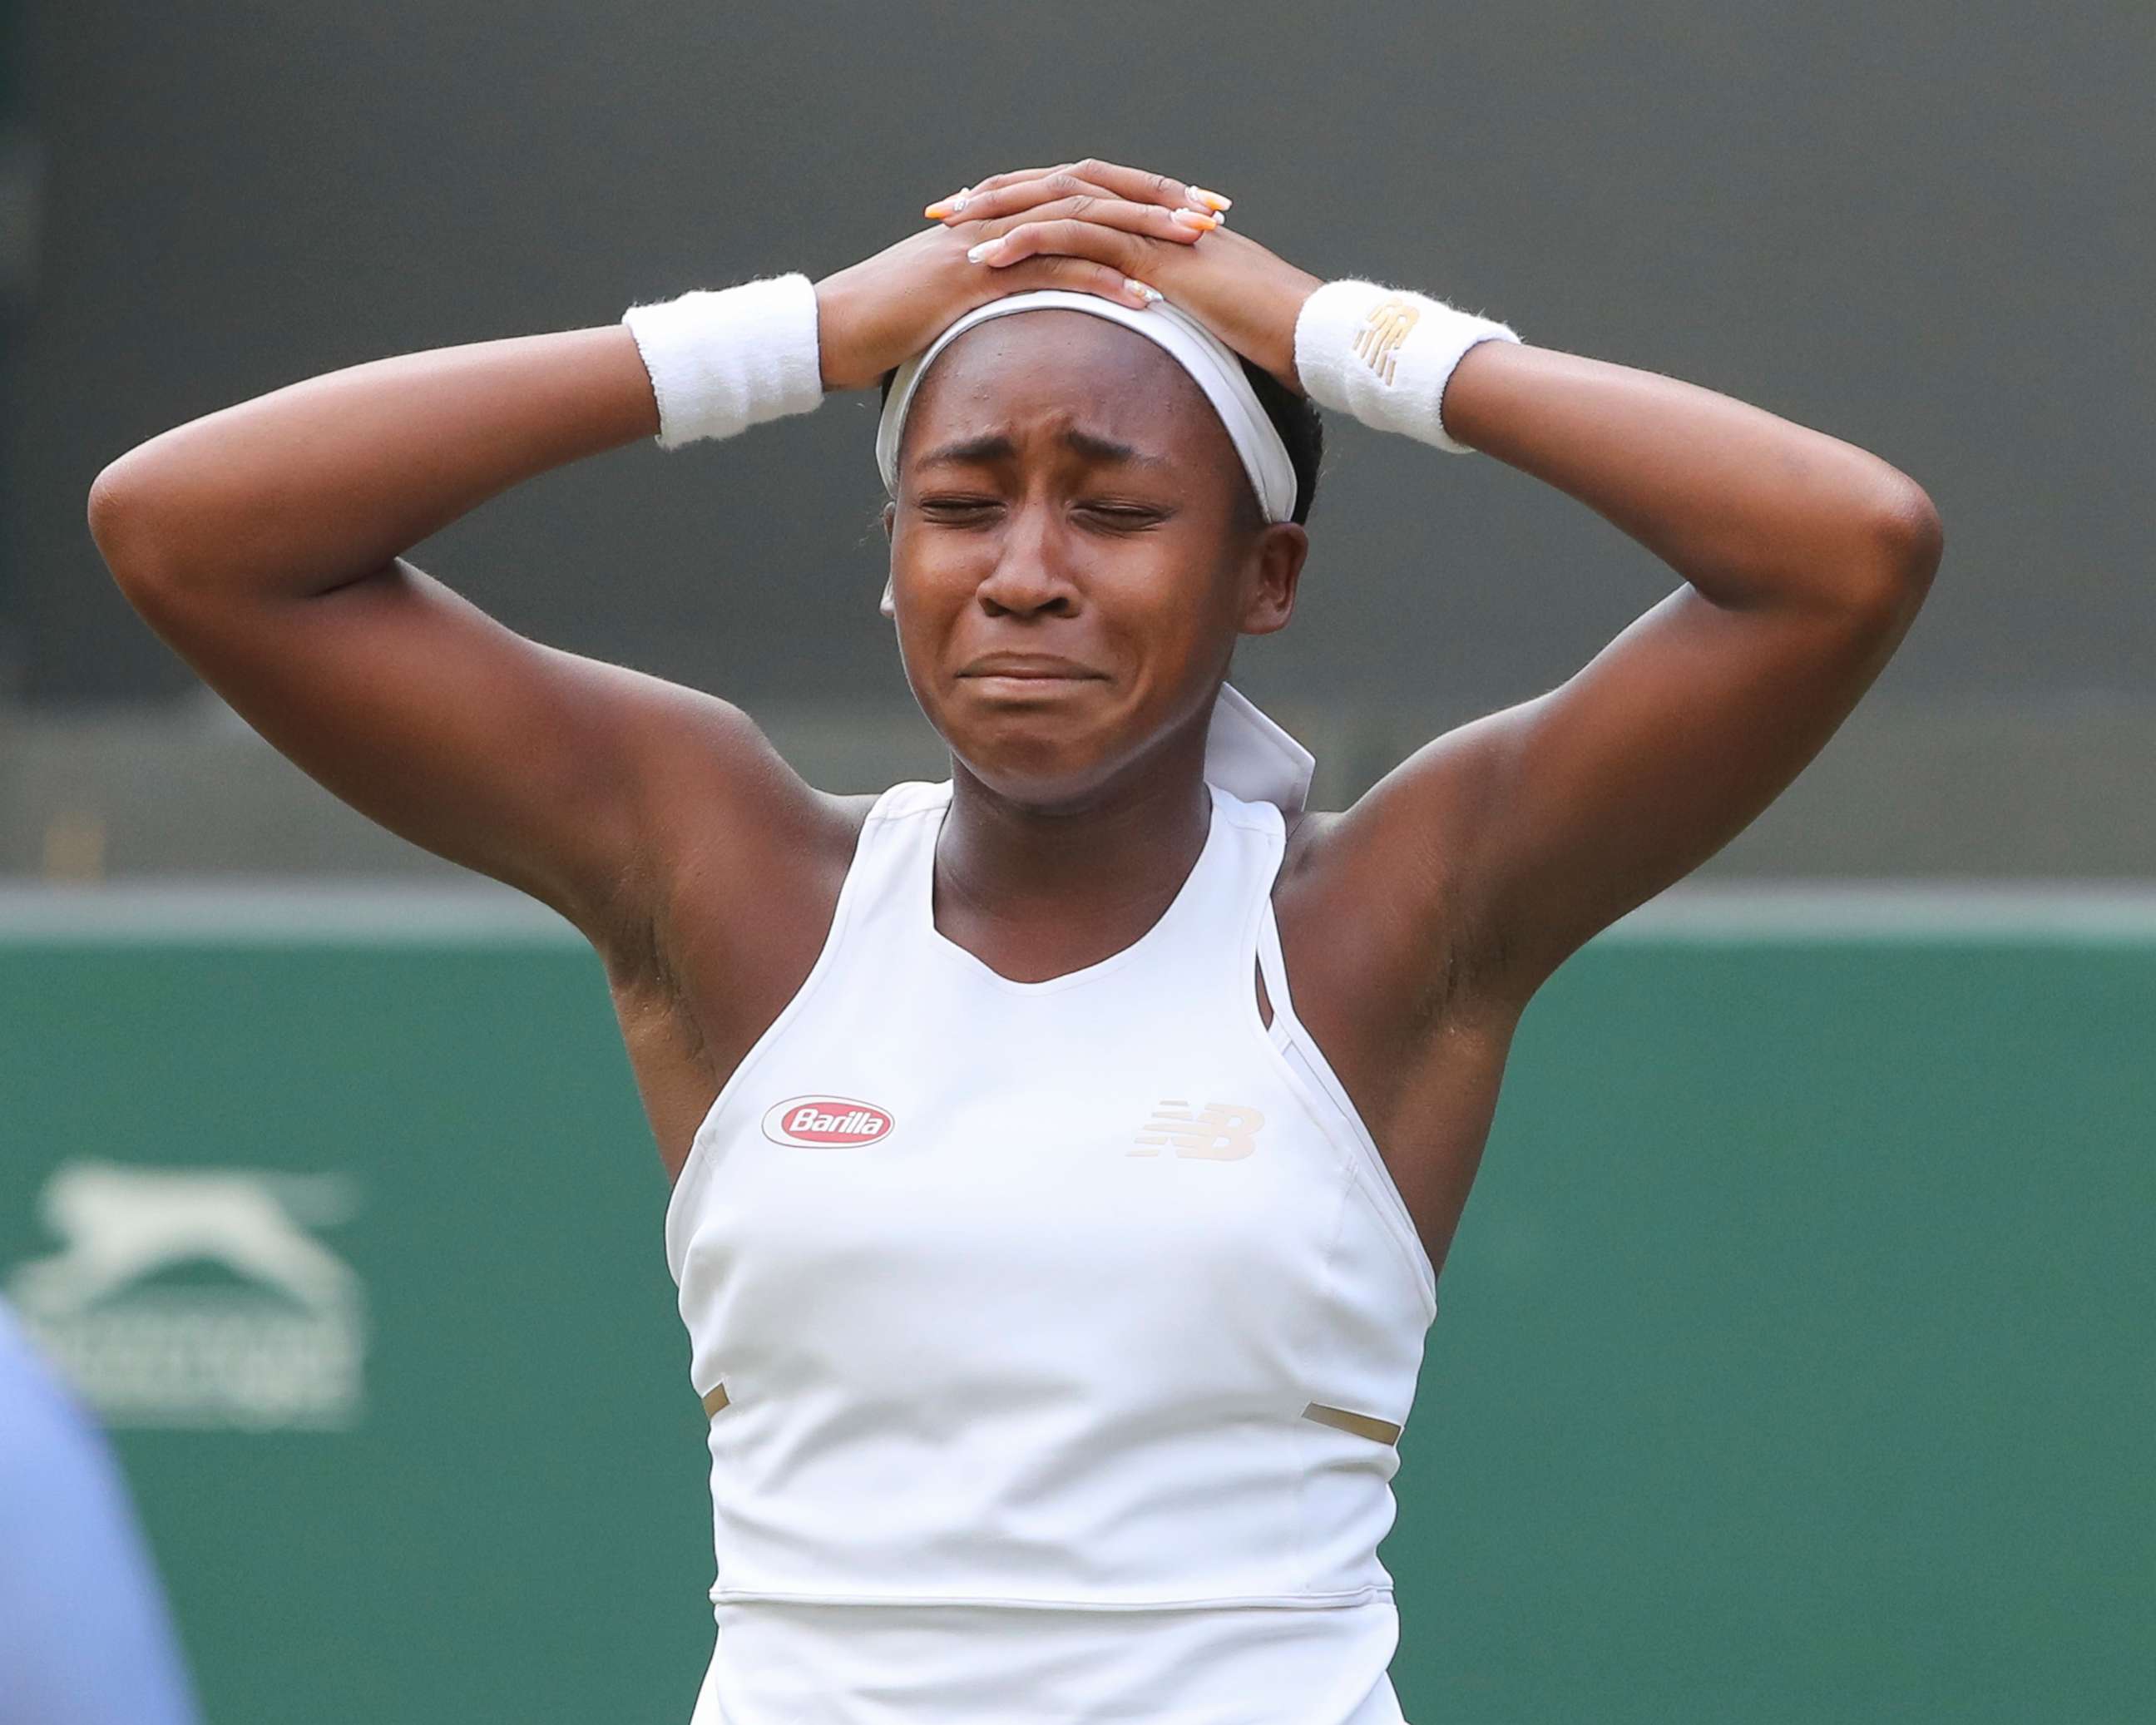 PHOTO: Cori Gauff reacts during the first round at the Wimbledon Tennis Championships, Day 1, The All England Lawn Tennis and Croquet Club, London, July 1, 2019.